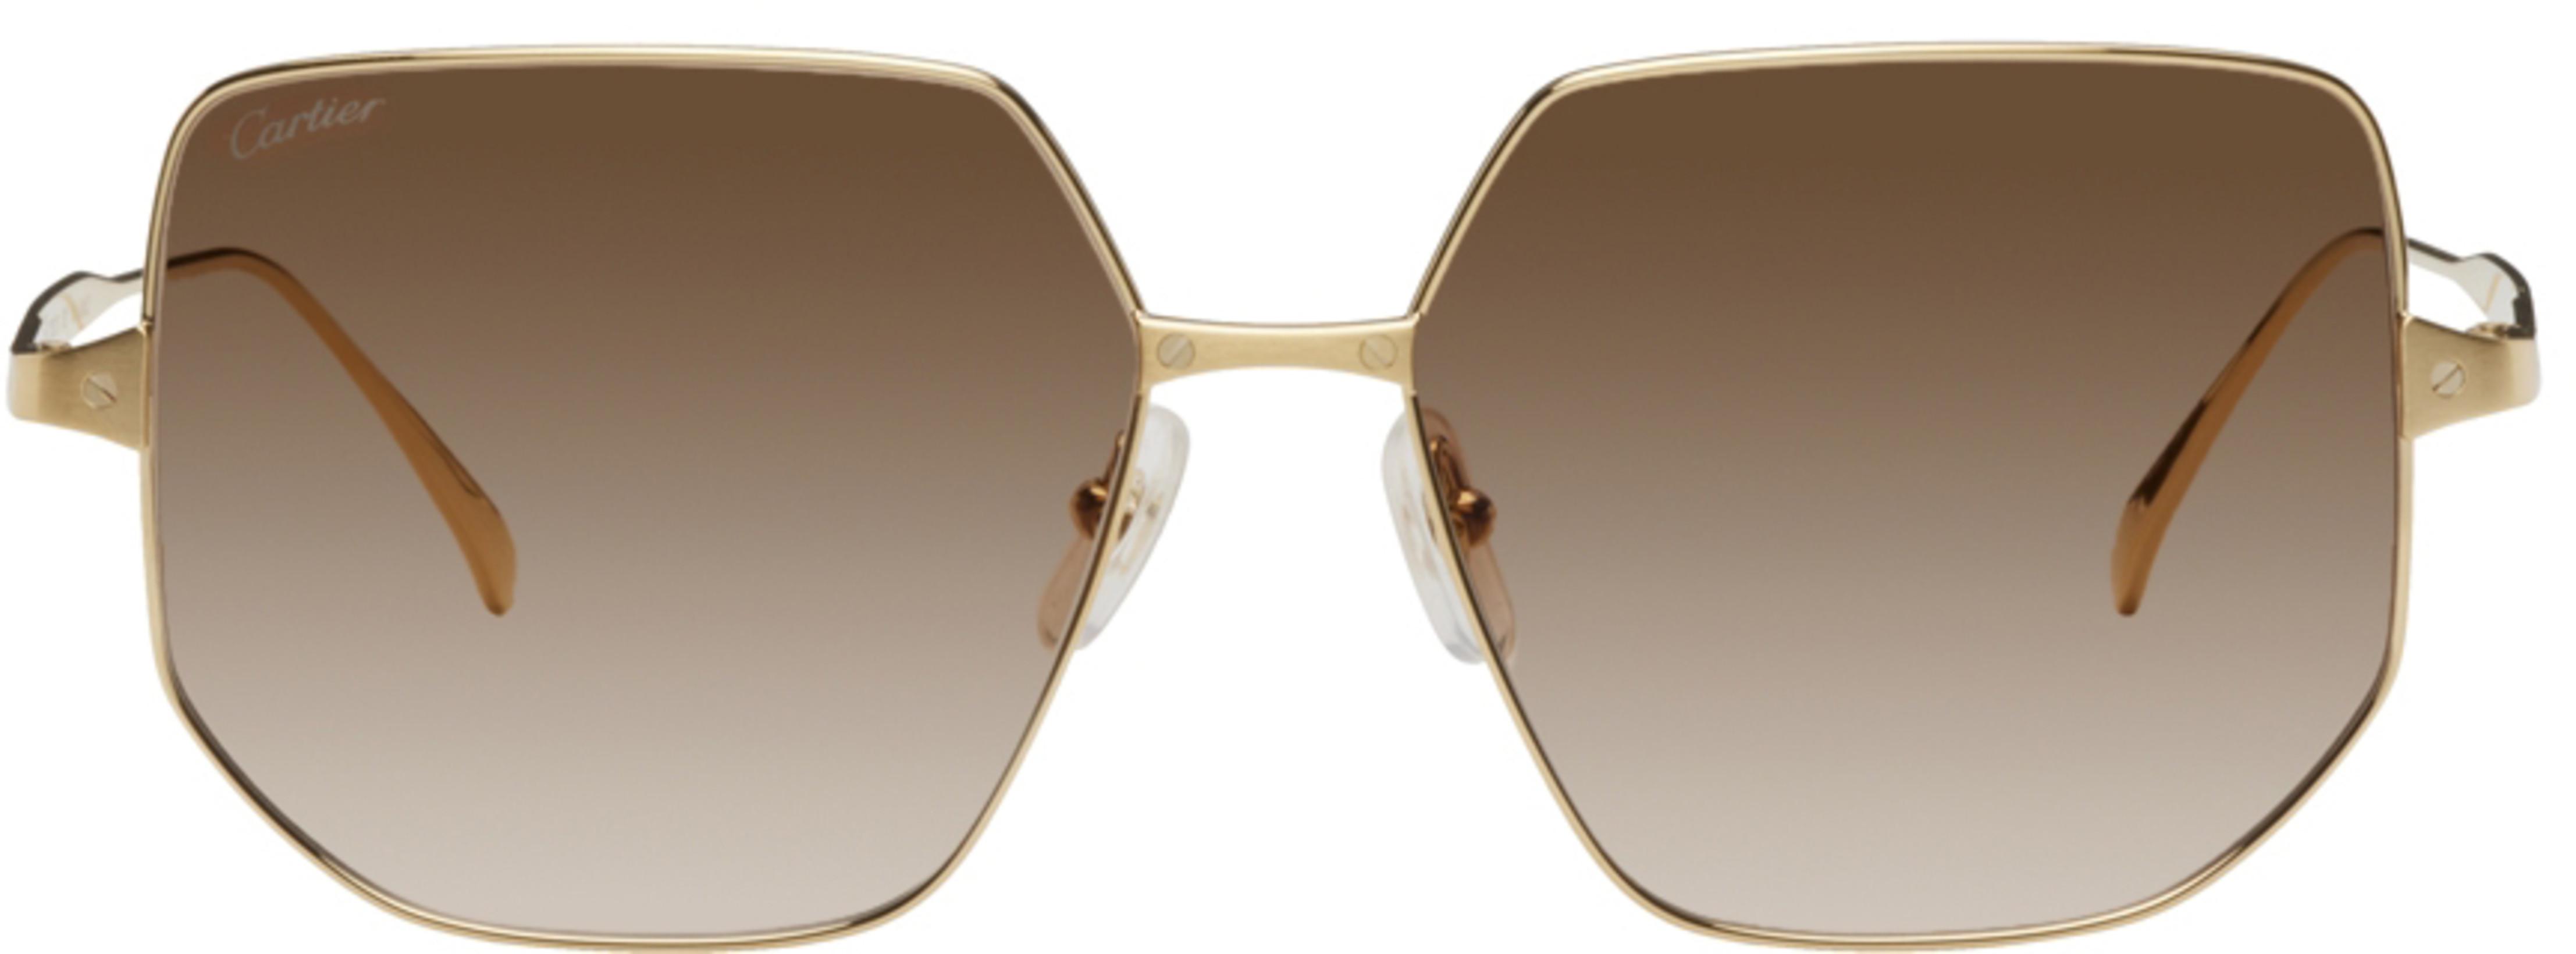 Gold Square Sunglasses by CARTIER